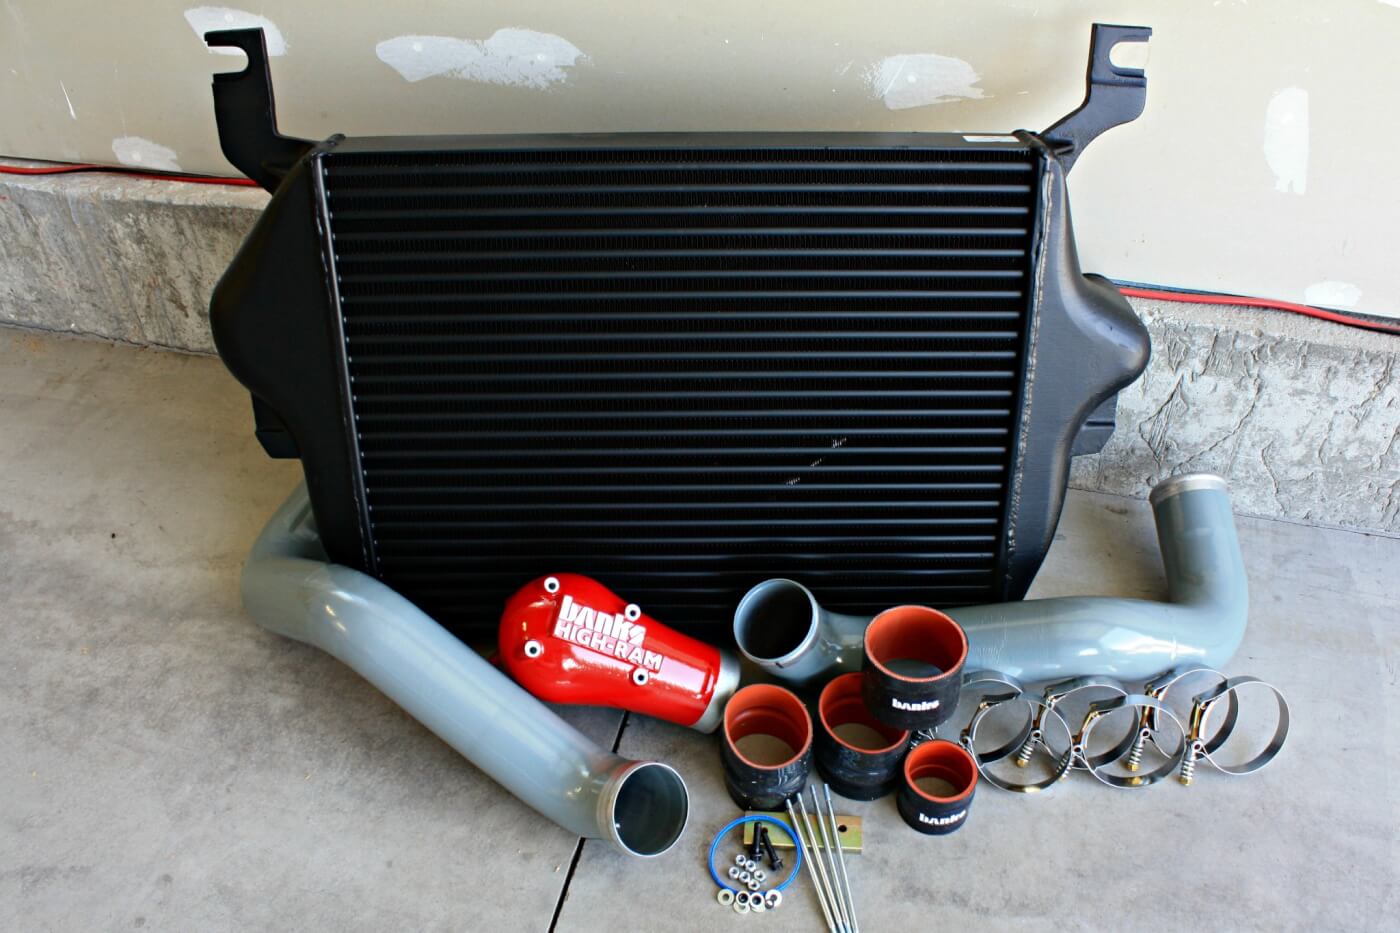 2. The Banks Power Technicooler kit for the 6.0L Power Stroke can improve airflow through the charge air system by over 38% by using a larger free flowing intercooler core, large 3-inch intercooler piping and the High Ram intake elbow; the air from the turbocharger has a less restrictive passage to the cylinder heads and will equate to improve throttle response, cooler air temps, lower EGTs and quicker turbo spool-up.